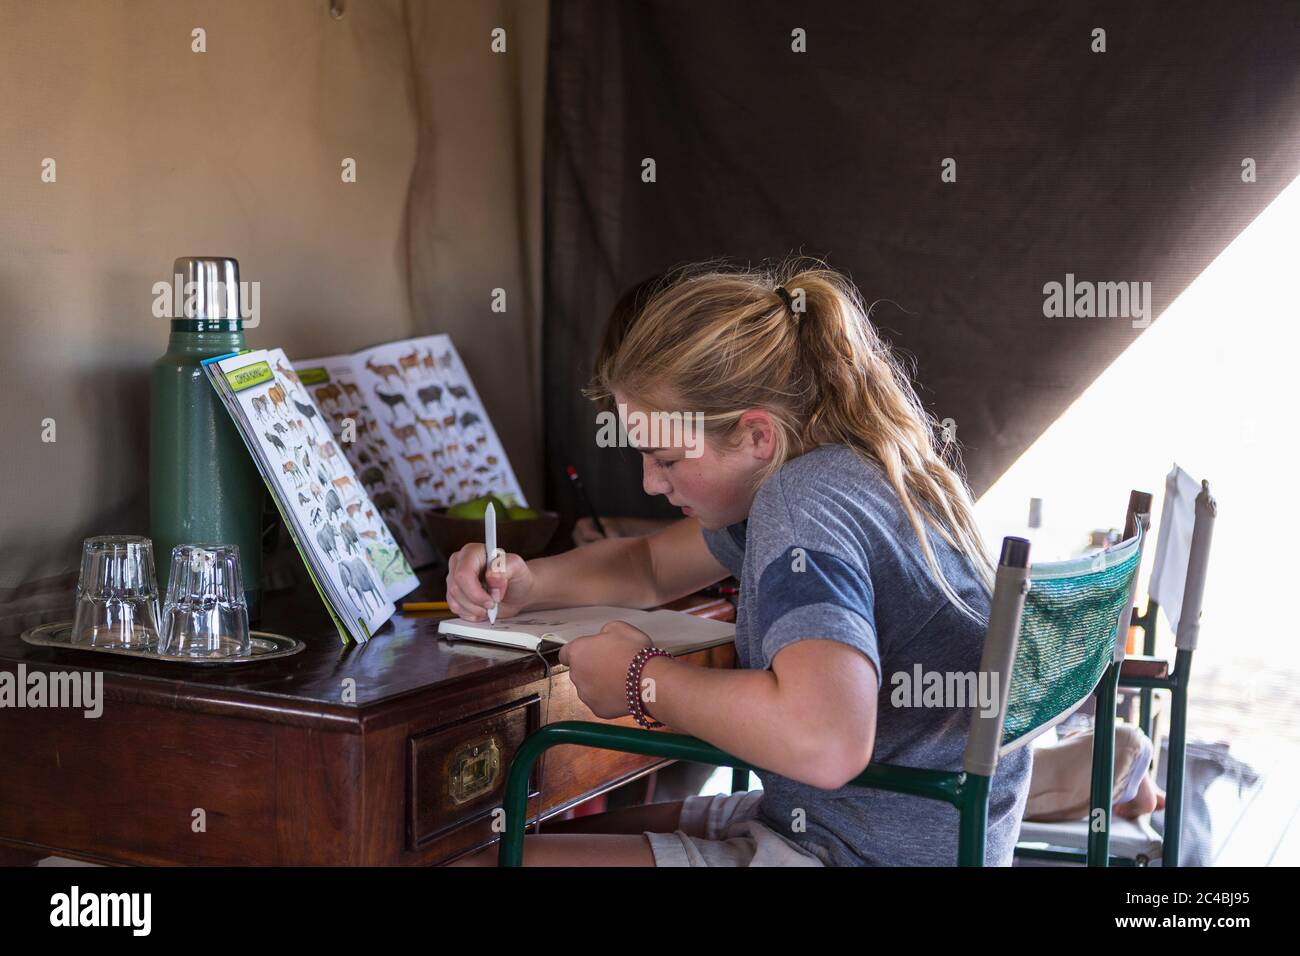 Twelve year old girl seated in a tent, writing or drawing in a journal. Stock Photo